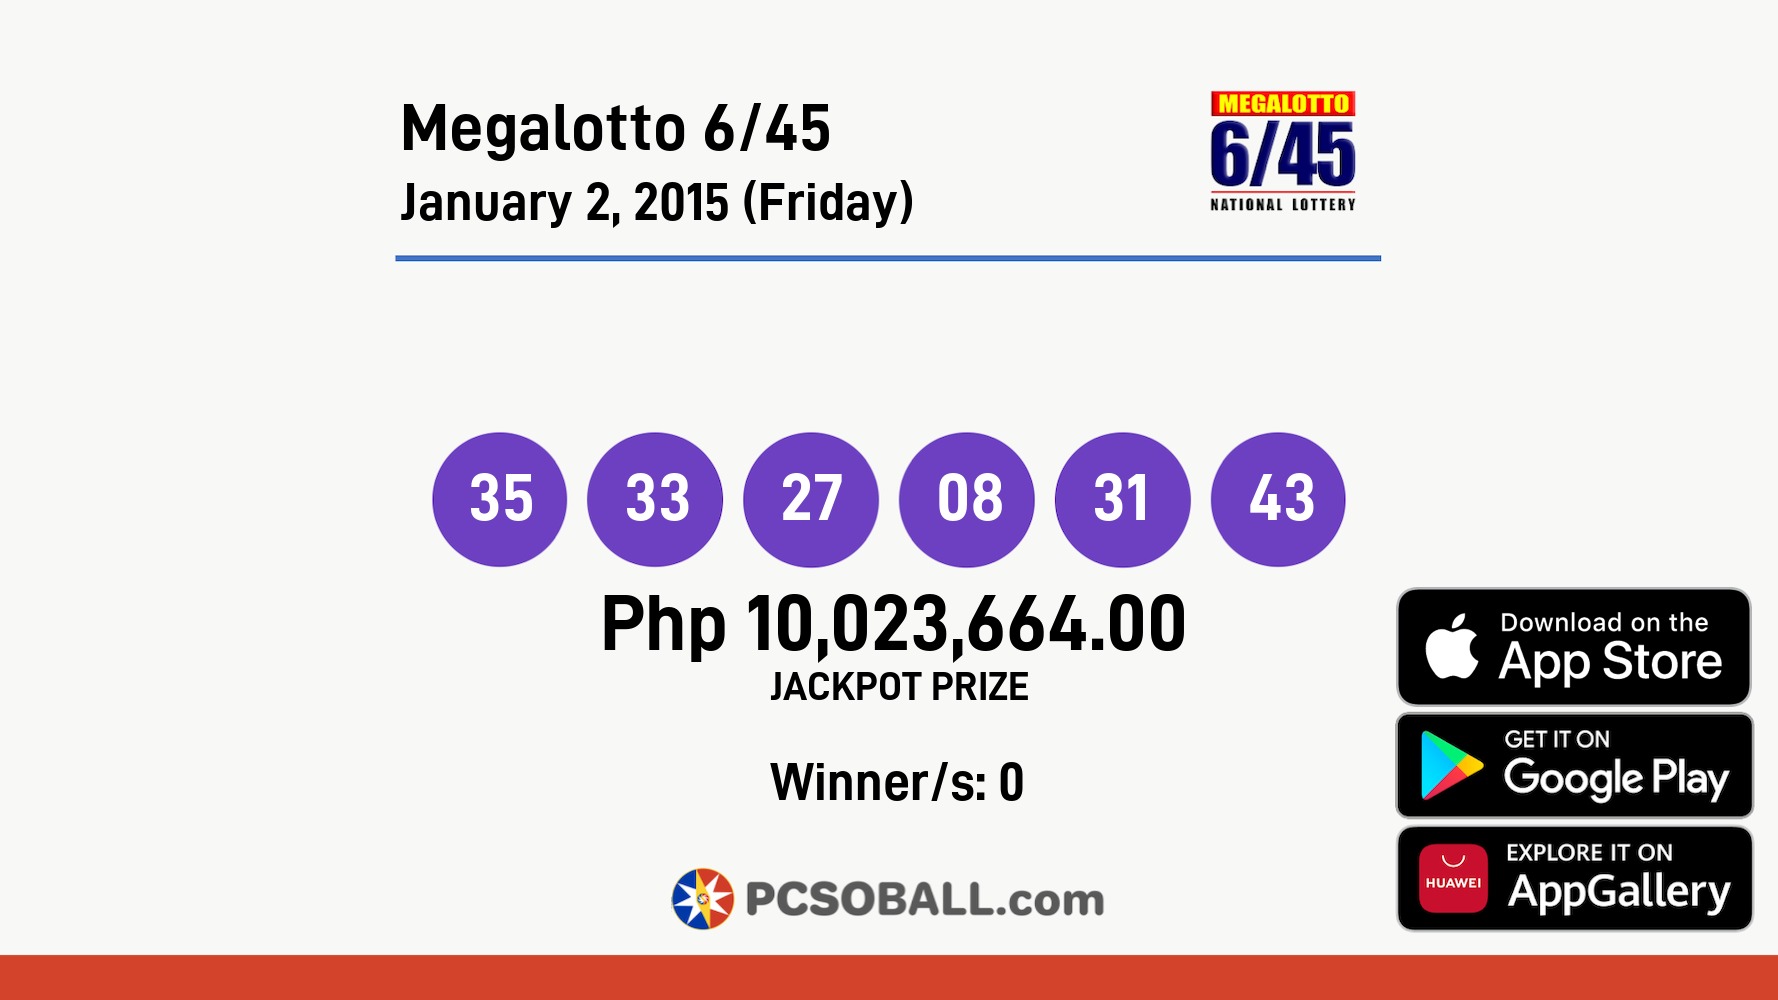 Megalotto 6/45 January 2, 2015 (Friday) Result